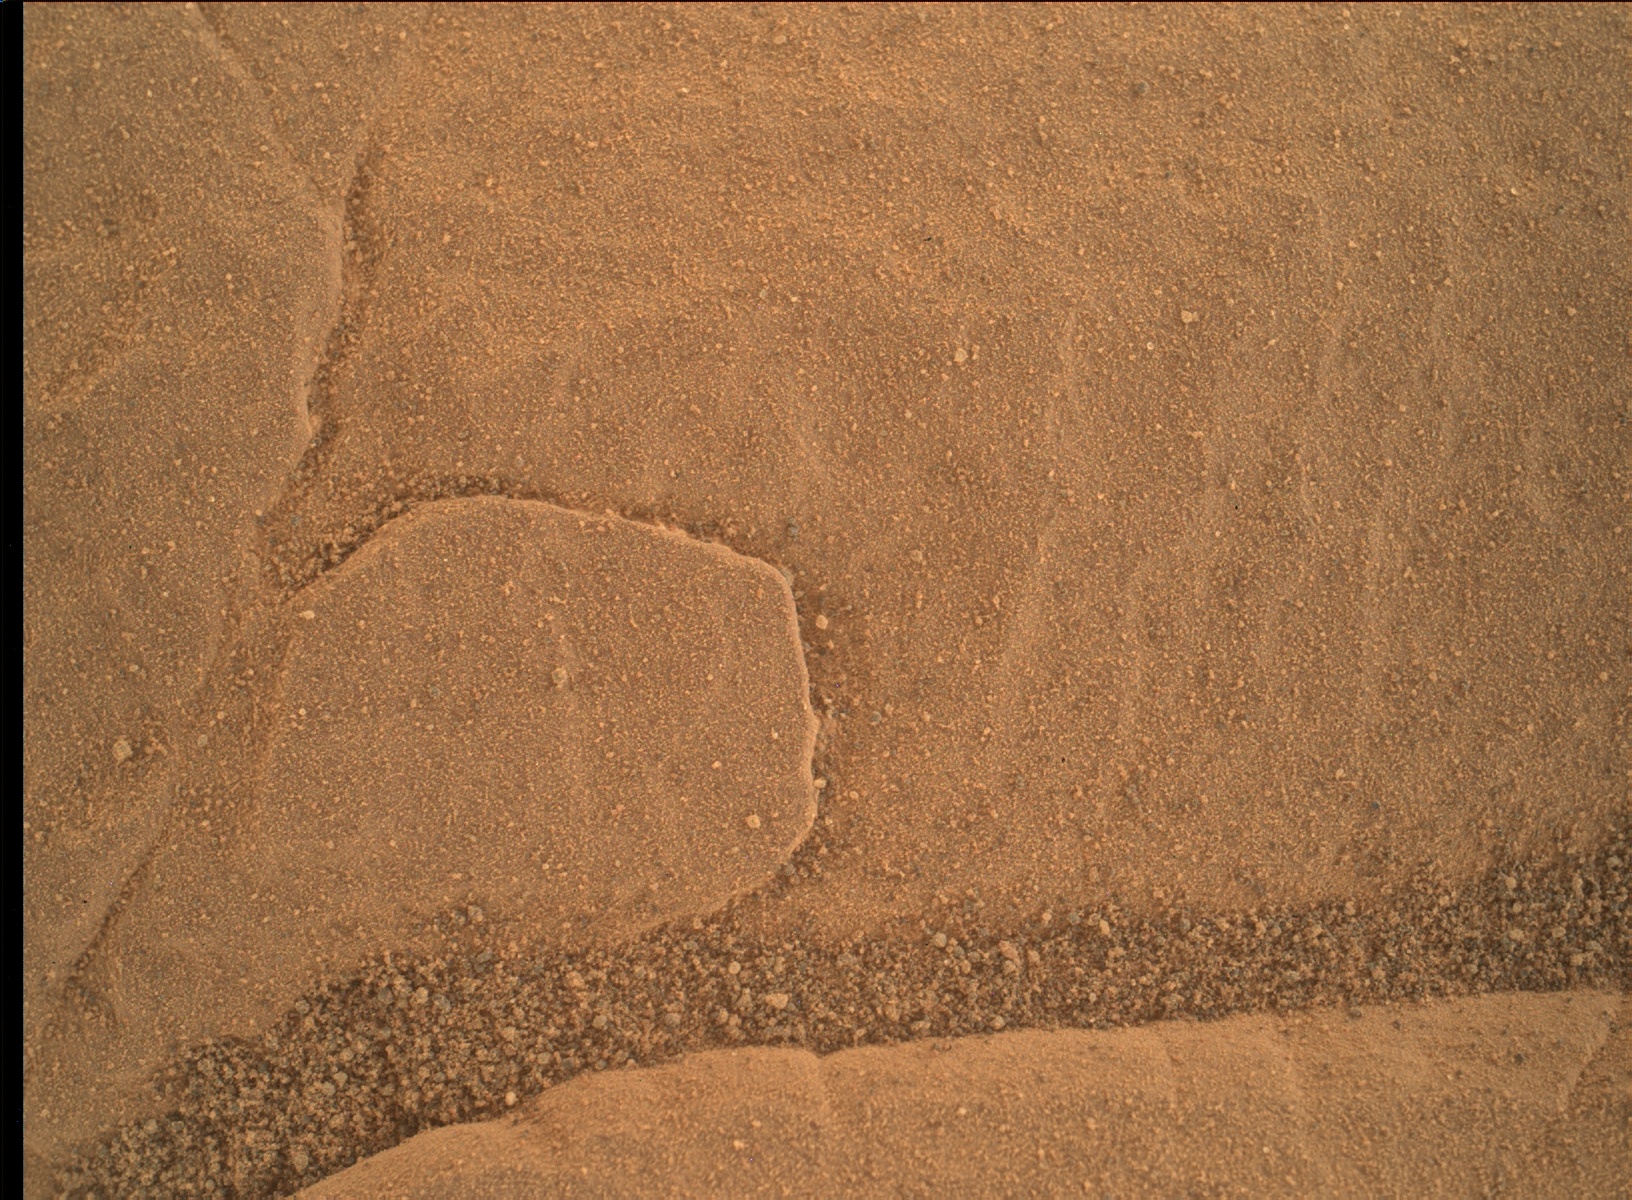 Nasa's Mars rover Curiosity acquired this image using its Mars Hand Lens Imager (MAHLI) on Sol 1814